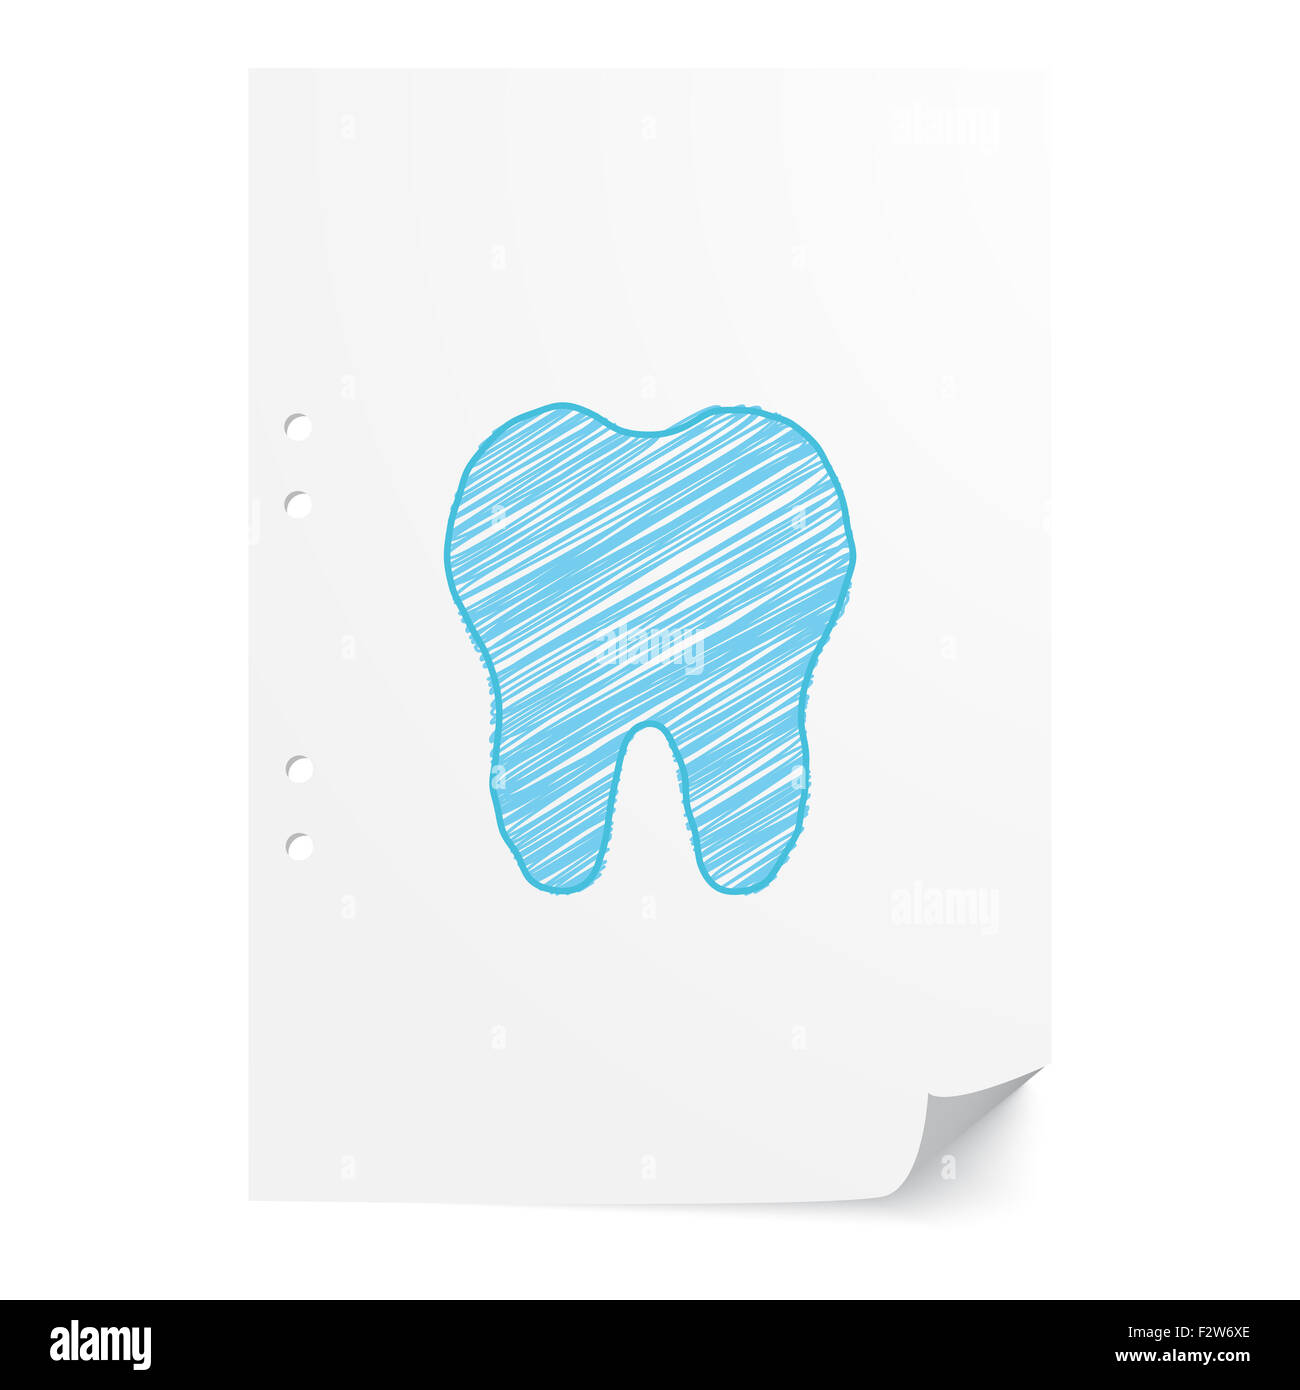 Blue handdrawn Tooth illustration on white paper sheet with copy space Stock Photo